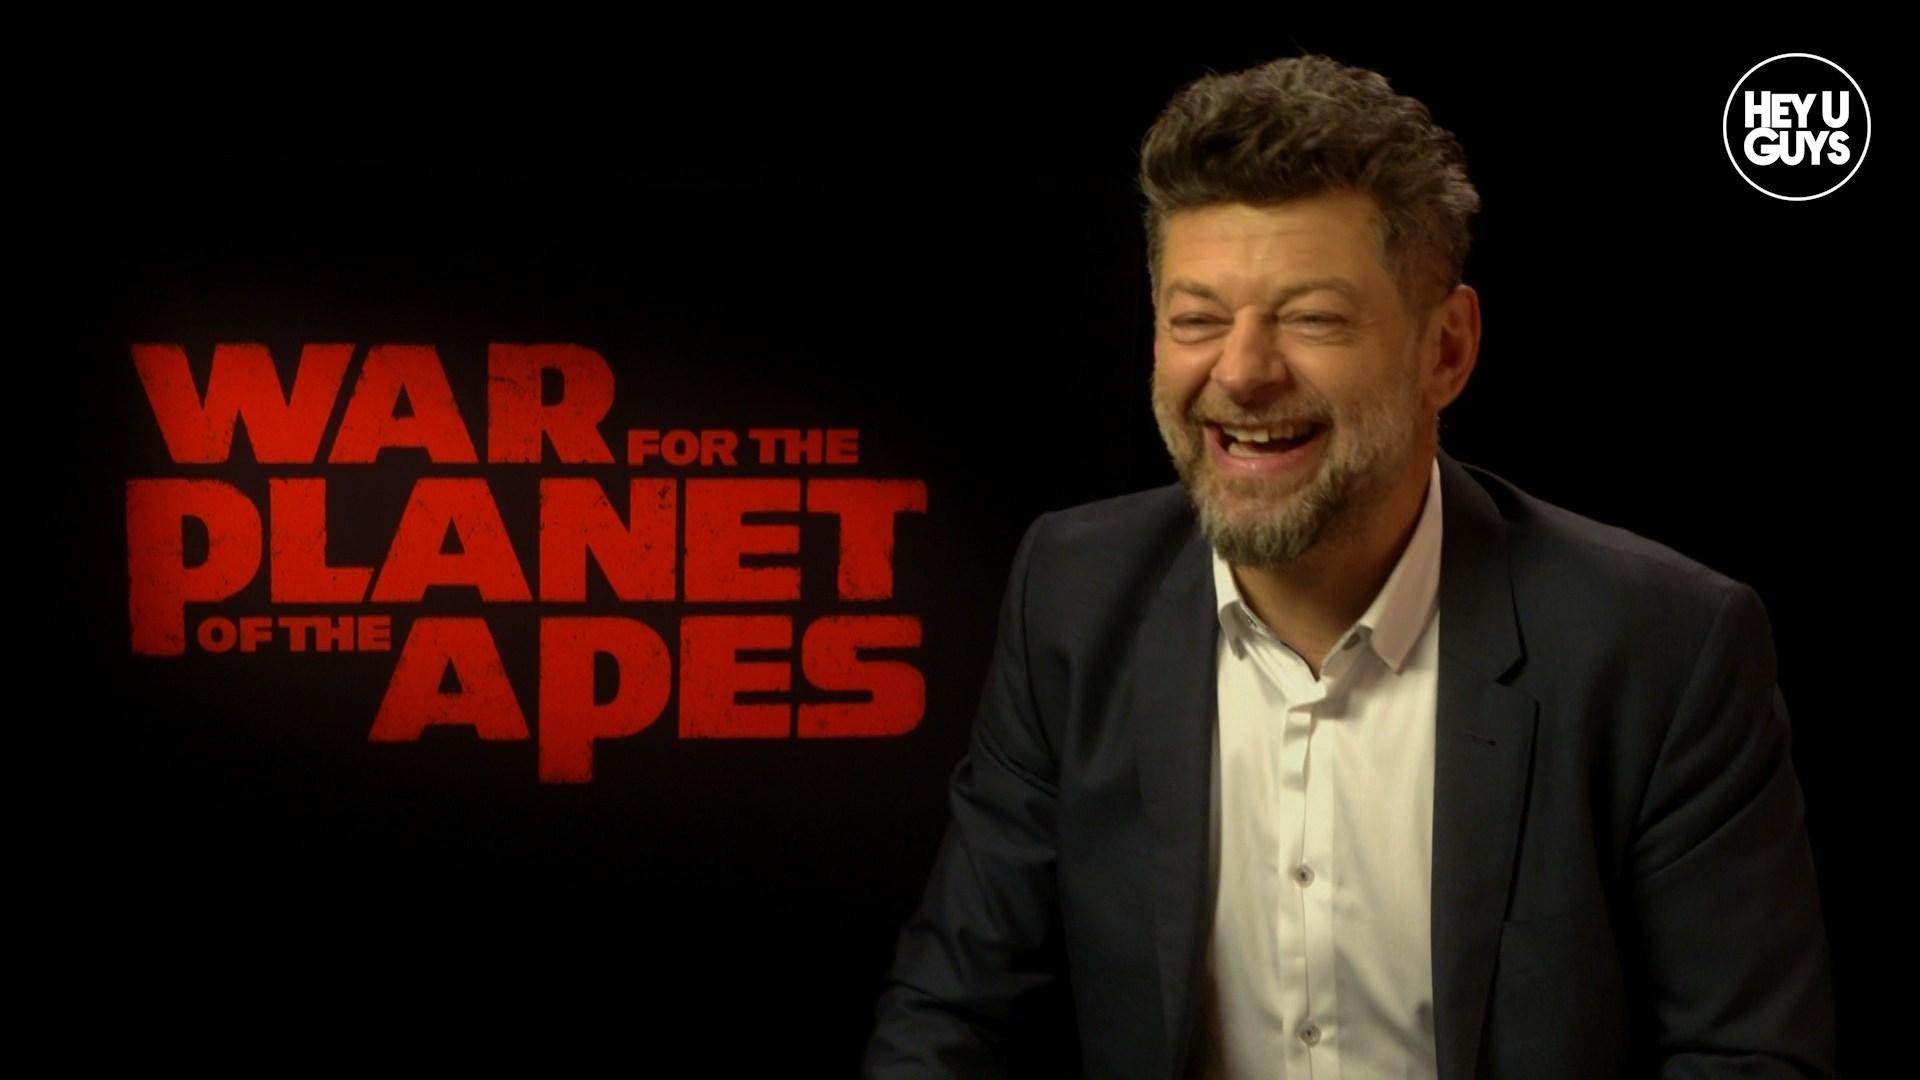 Exclusive: Andy Serkis Interview for the Planet of the Apes